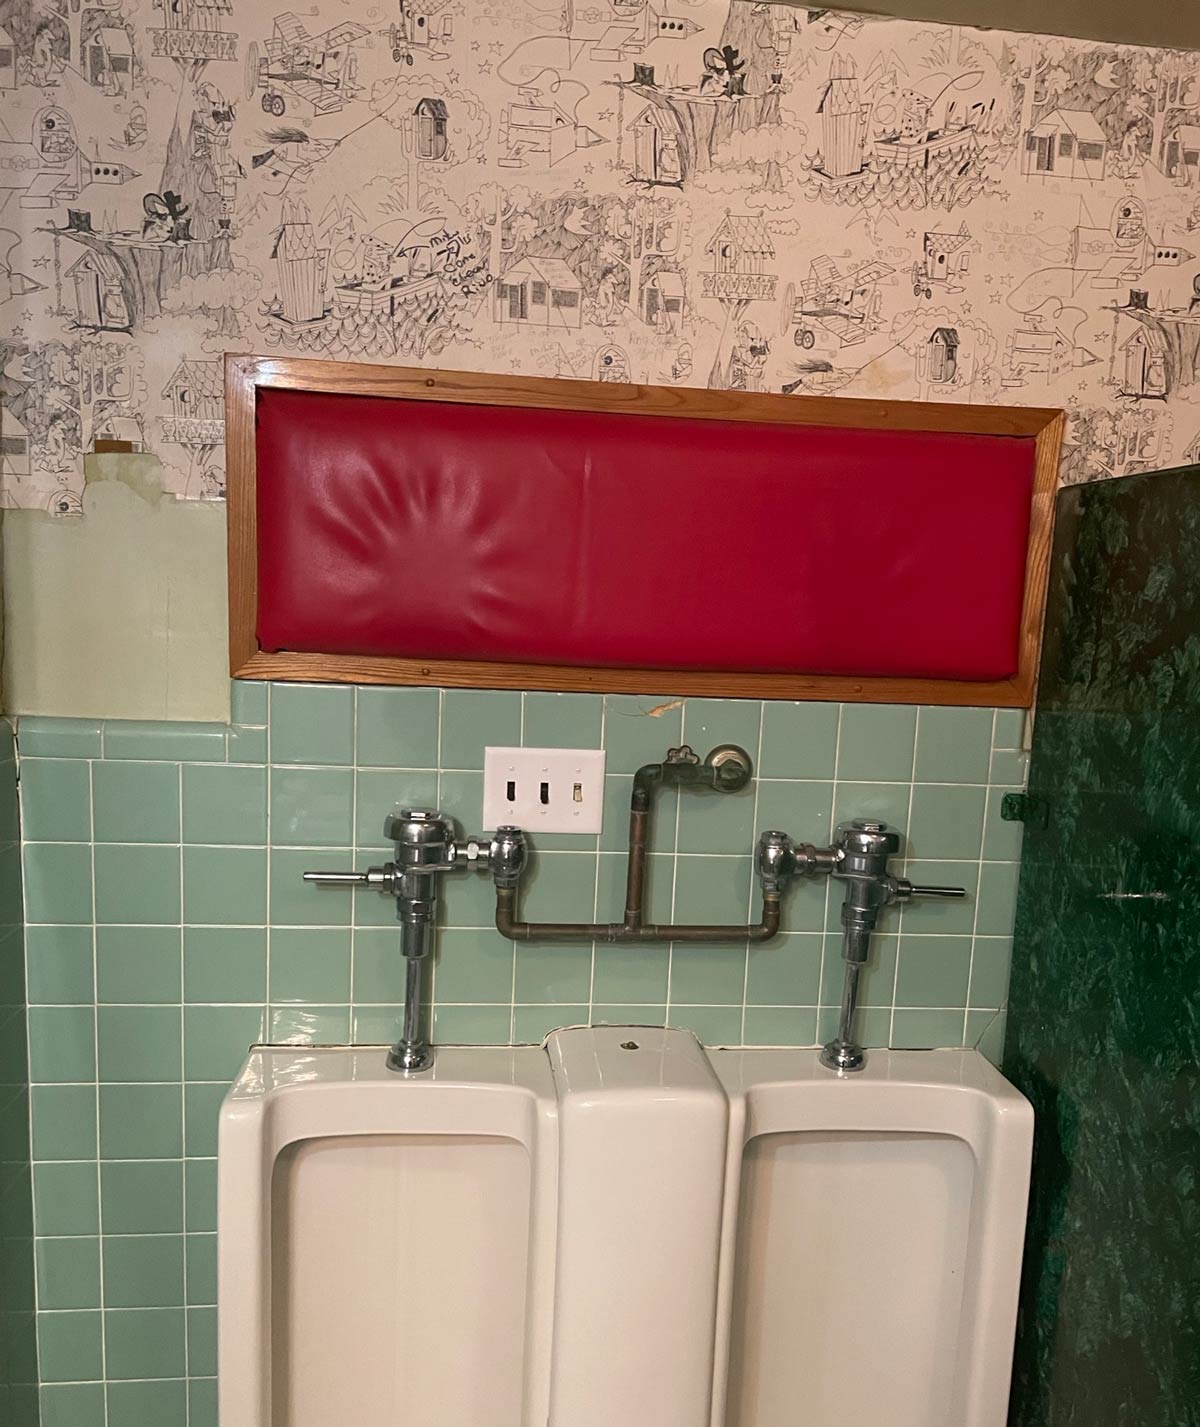 I’m at a townie bar in rural Wisconsin, they have a headrest at the urinals in the men’s room